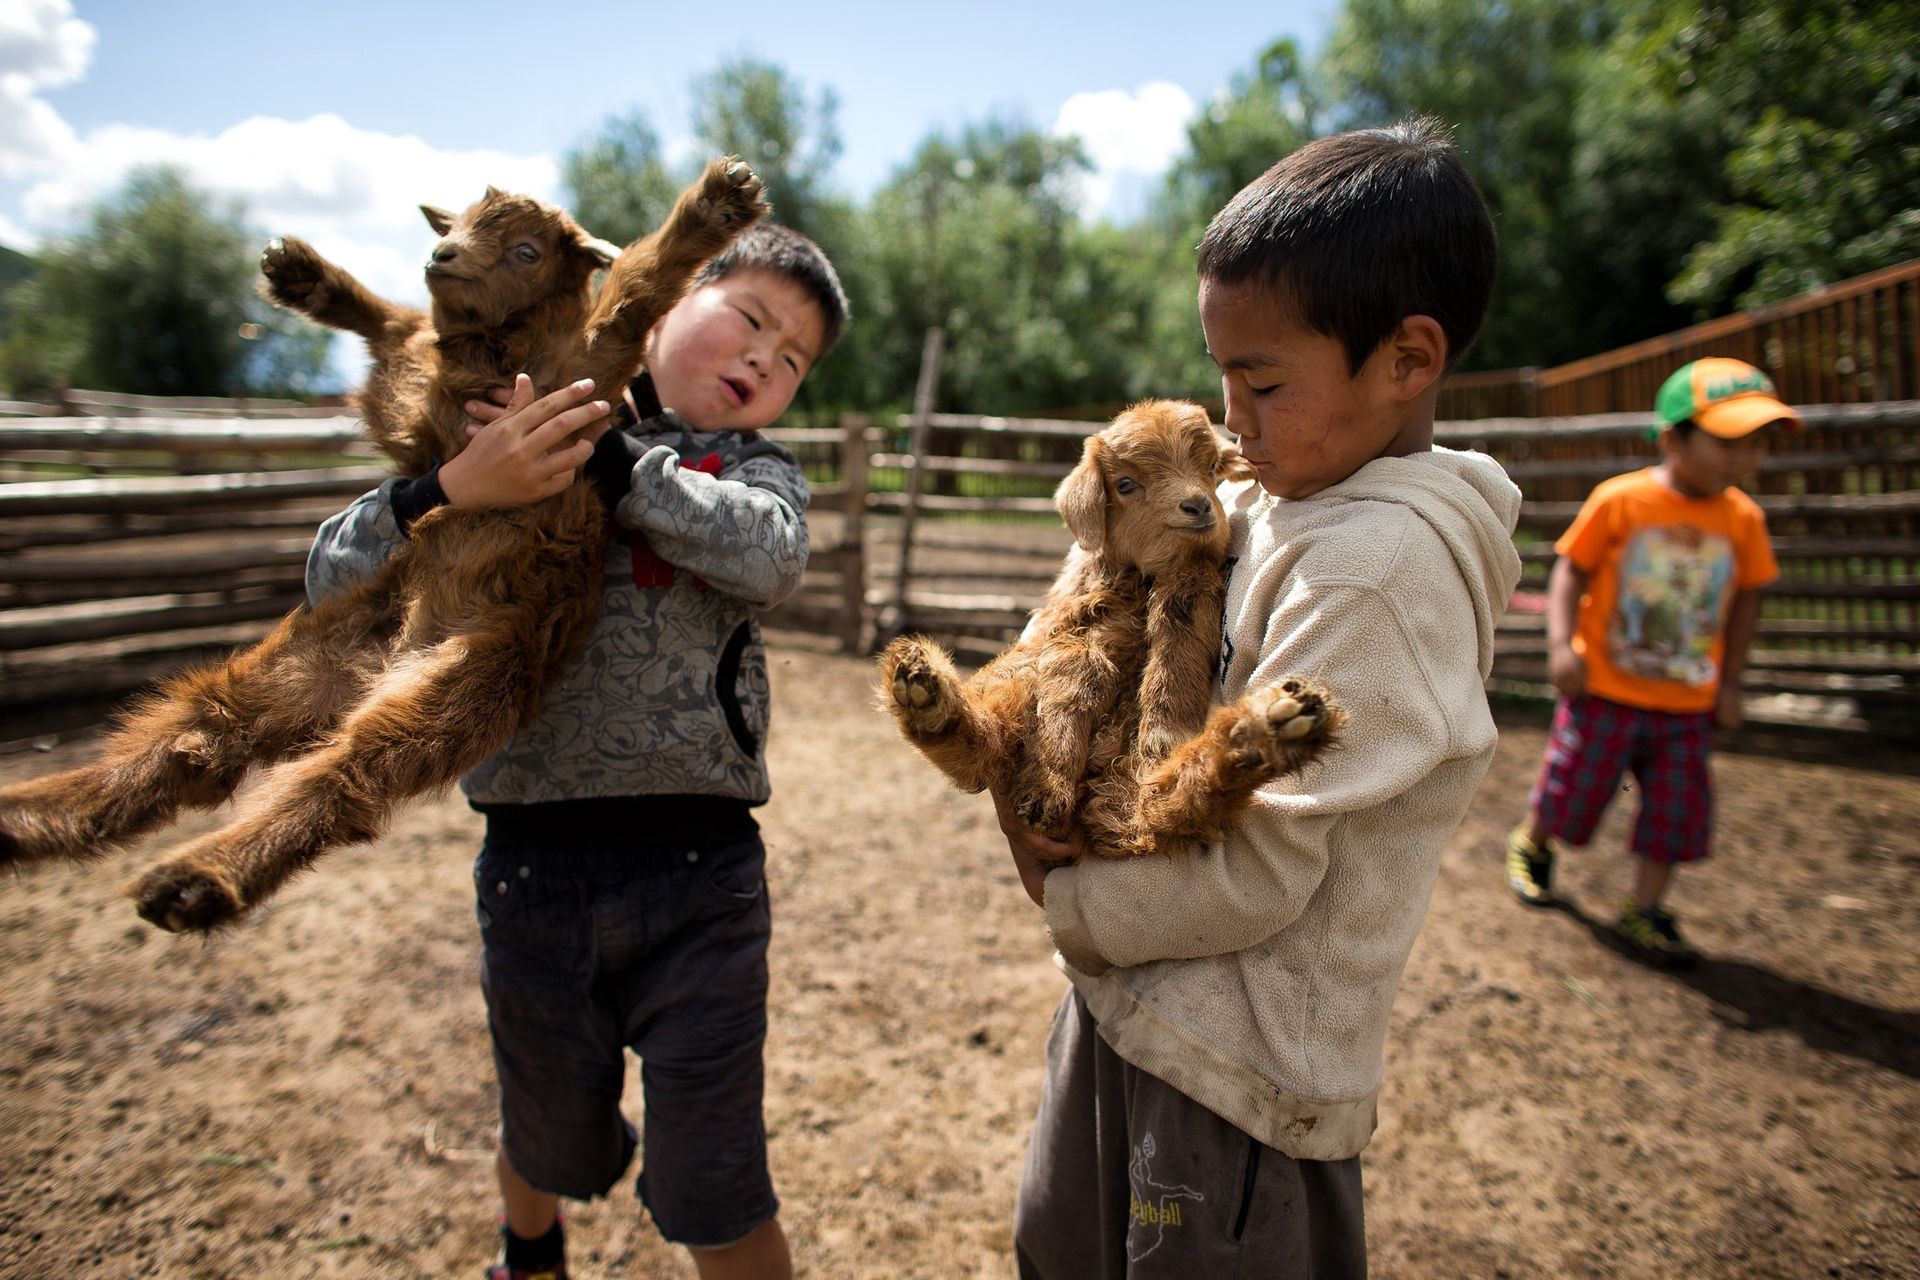 Children in Mongolia carrying baby goats.